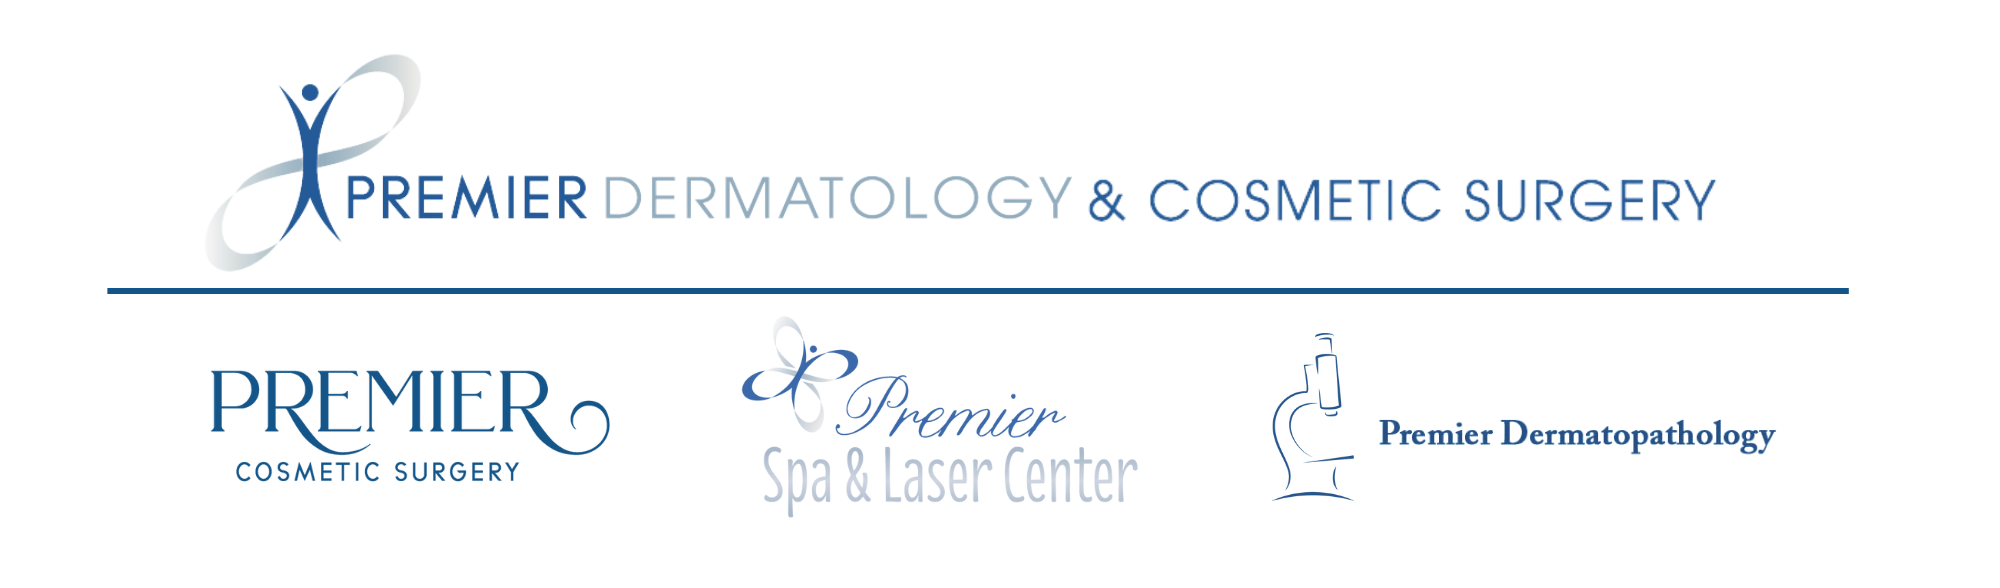 Premier Dermatology and Cosmetic Surgery Logo